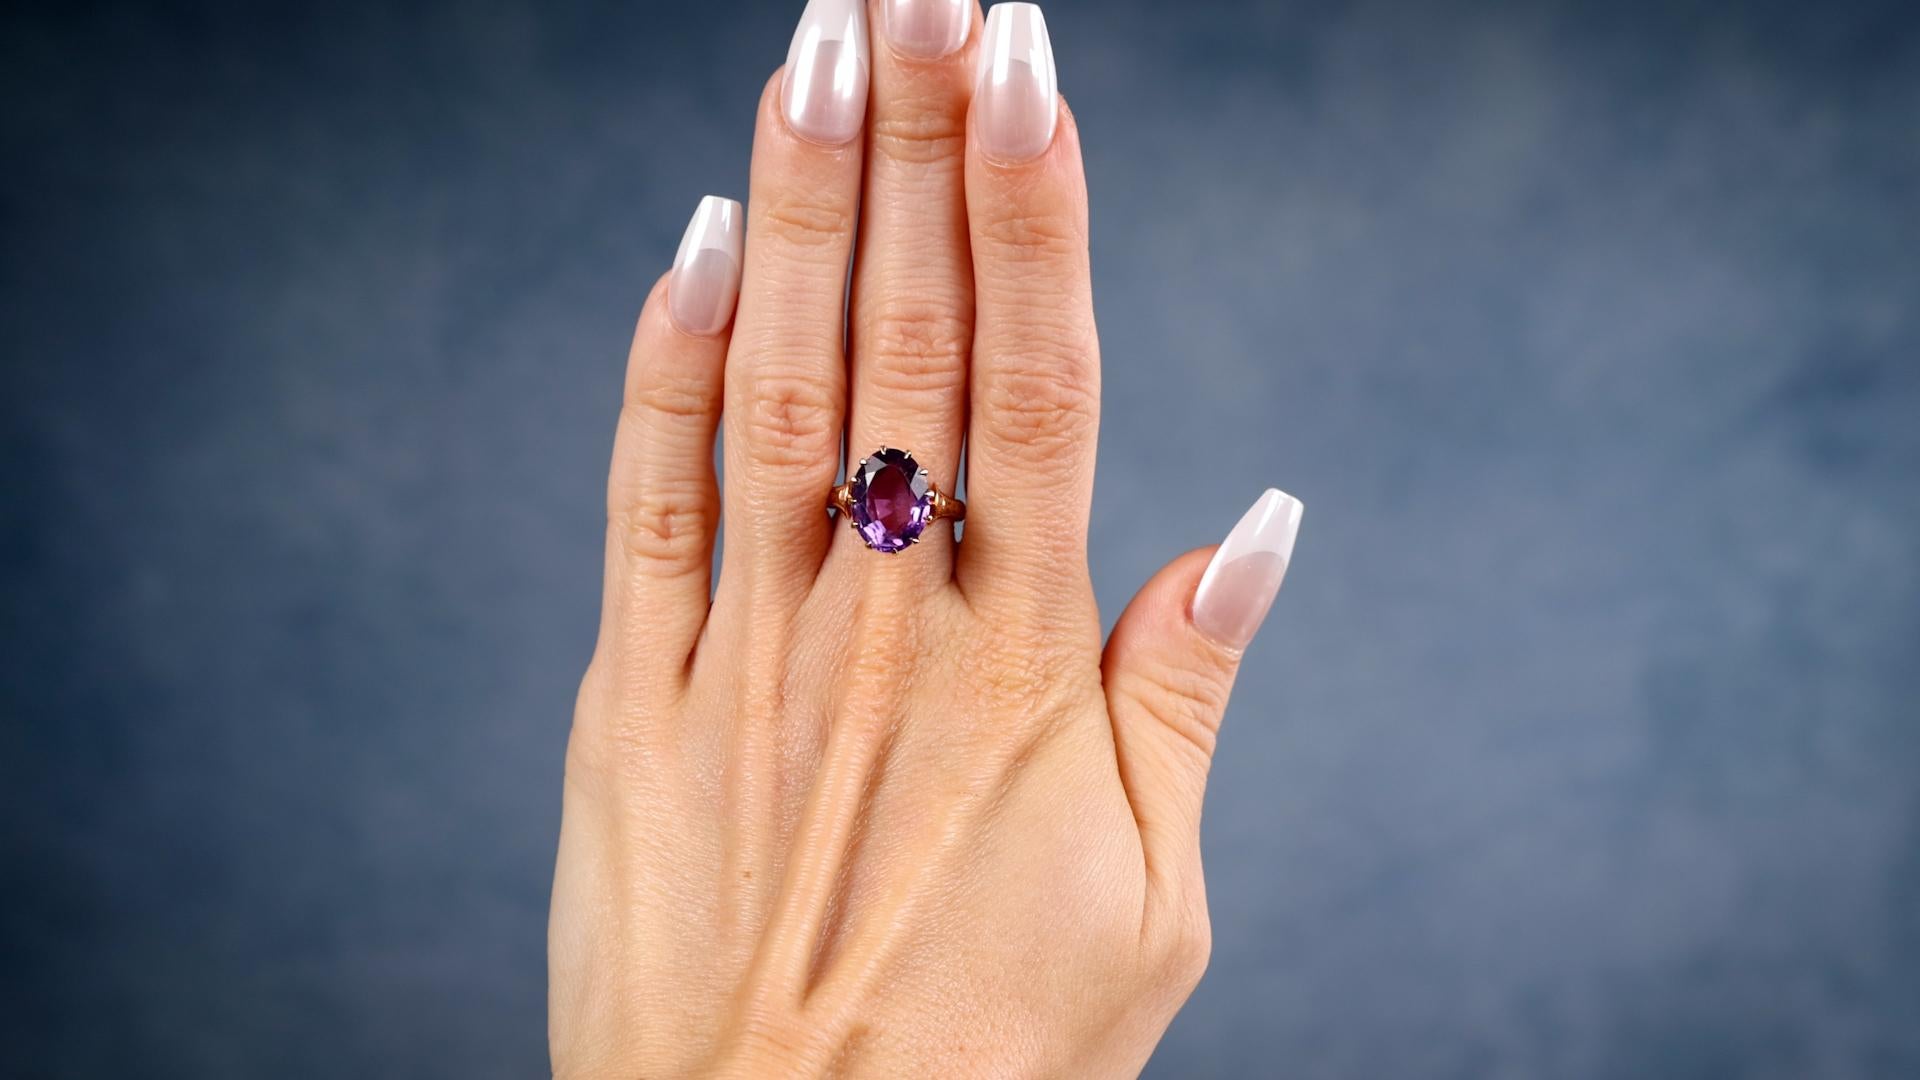 One Victorian Amethyst 14k Rose Gold Solitaire Ring. Featuring one oval mixed cut amethyst weighing approximately 4.10 carats. Crafted in 14 karat rose gold. The engraving inside the band reads “M.E.D., March 17, 1870.” Circa 1870. The ring is a